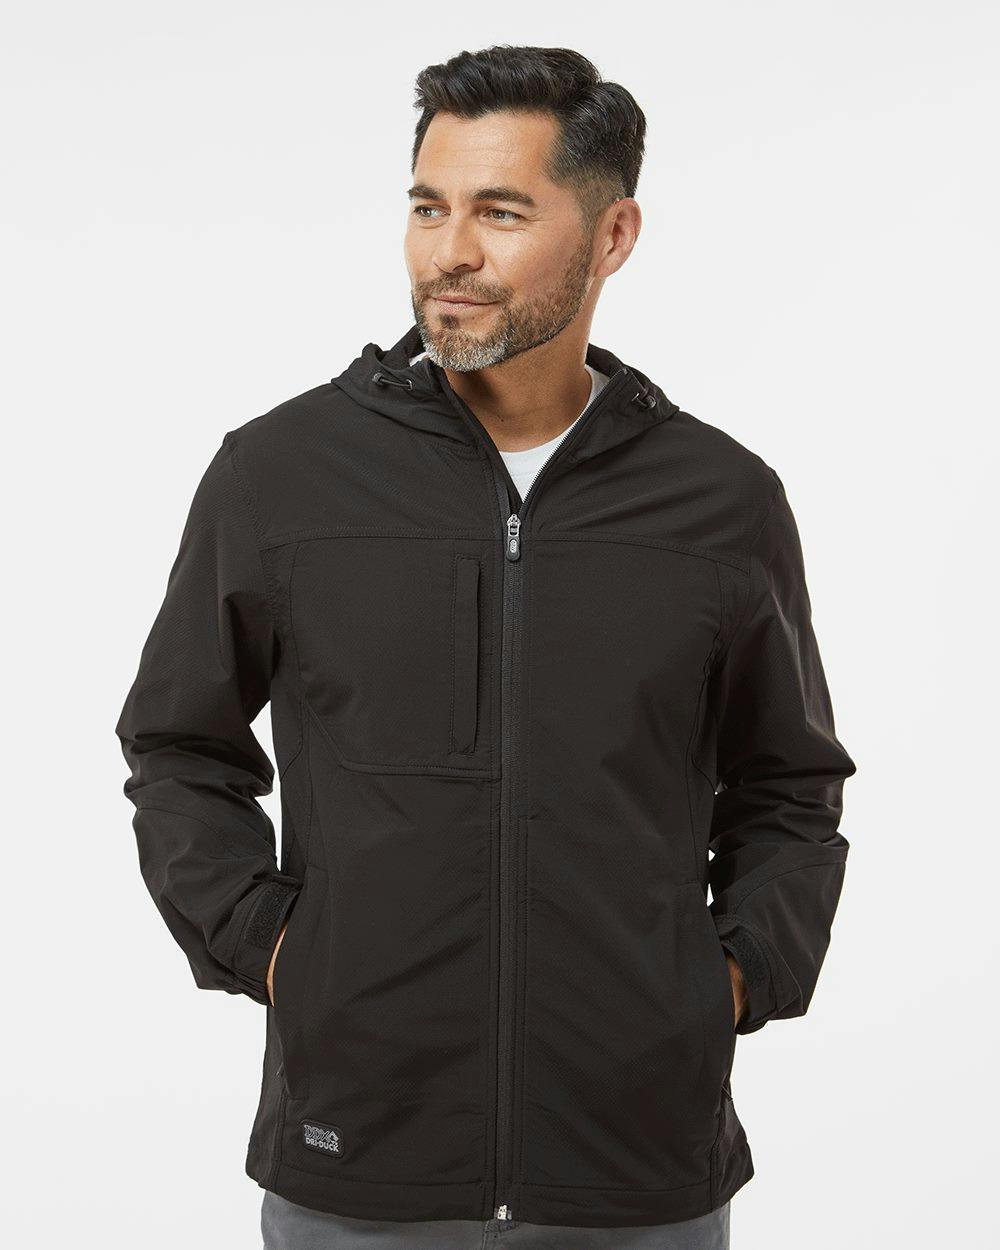 Image for Apex Soft Shell Hooded Jacket - 5310